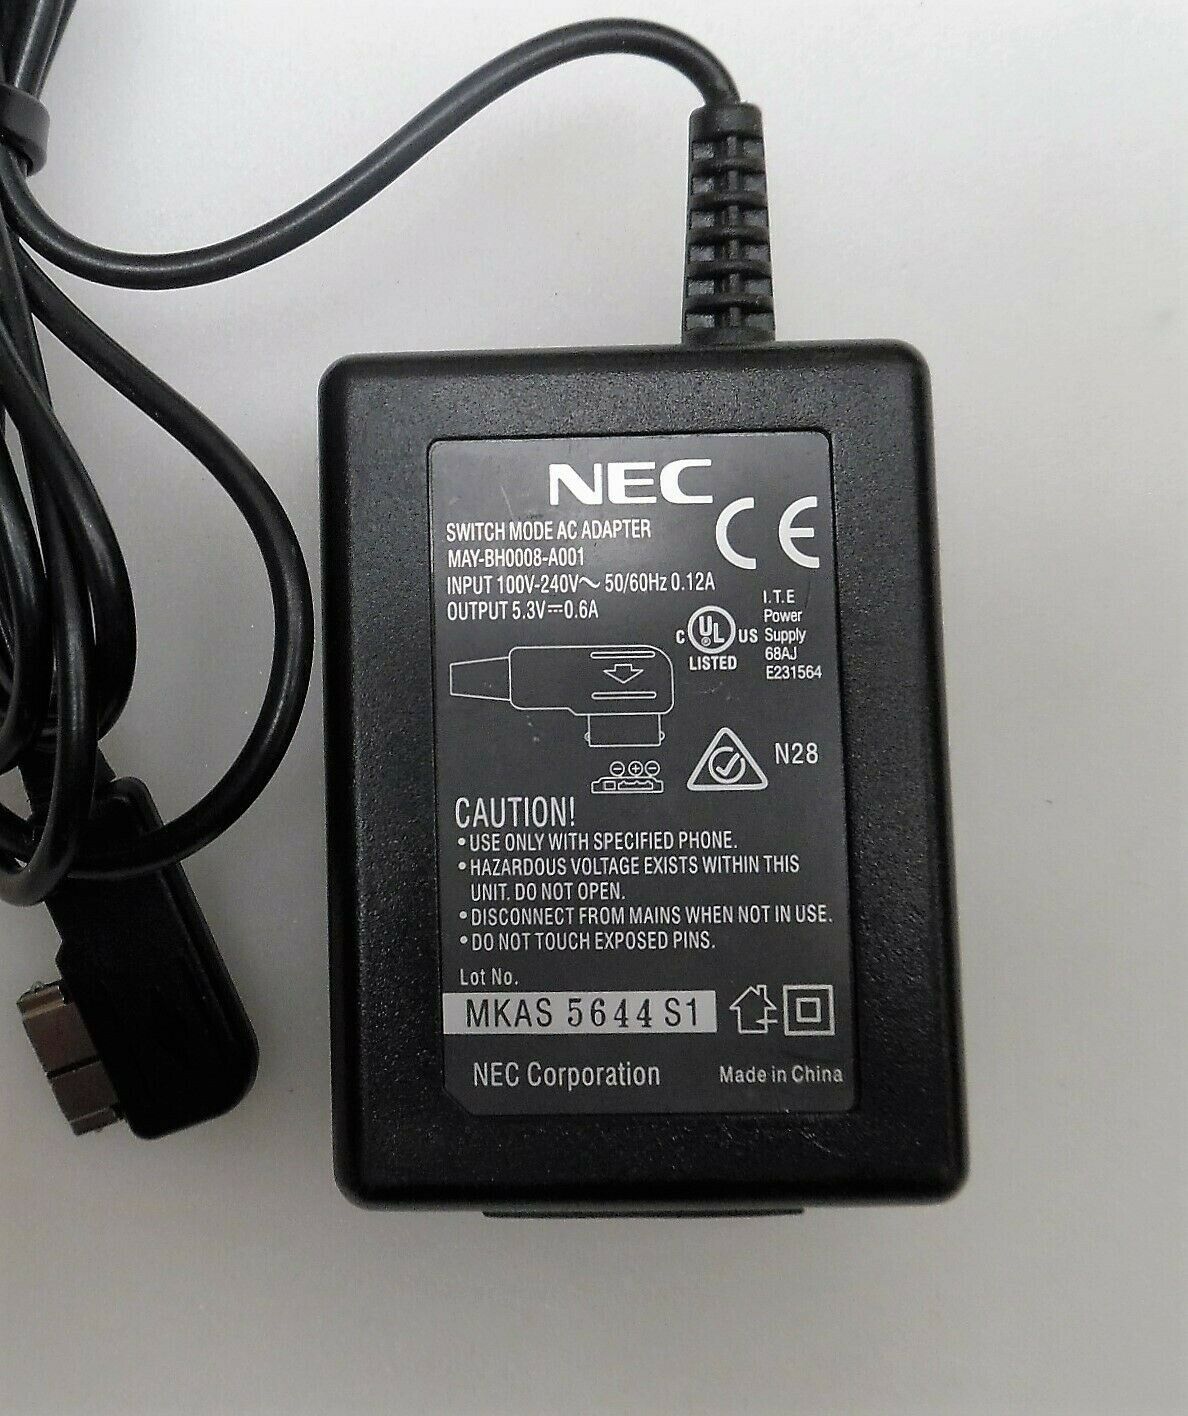 New NEC MAY-BH0008-A001 5.3V 0.6A AC DC Adapter Charger